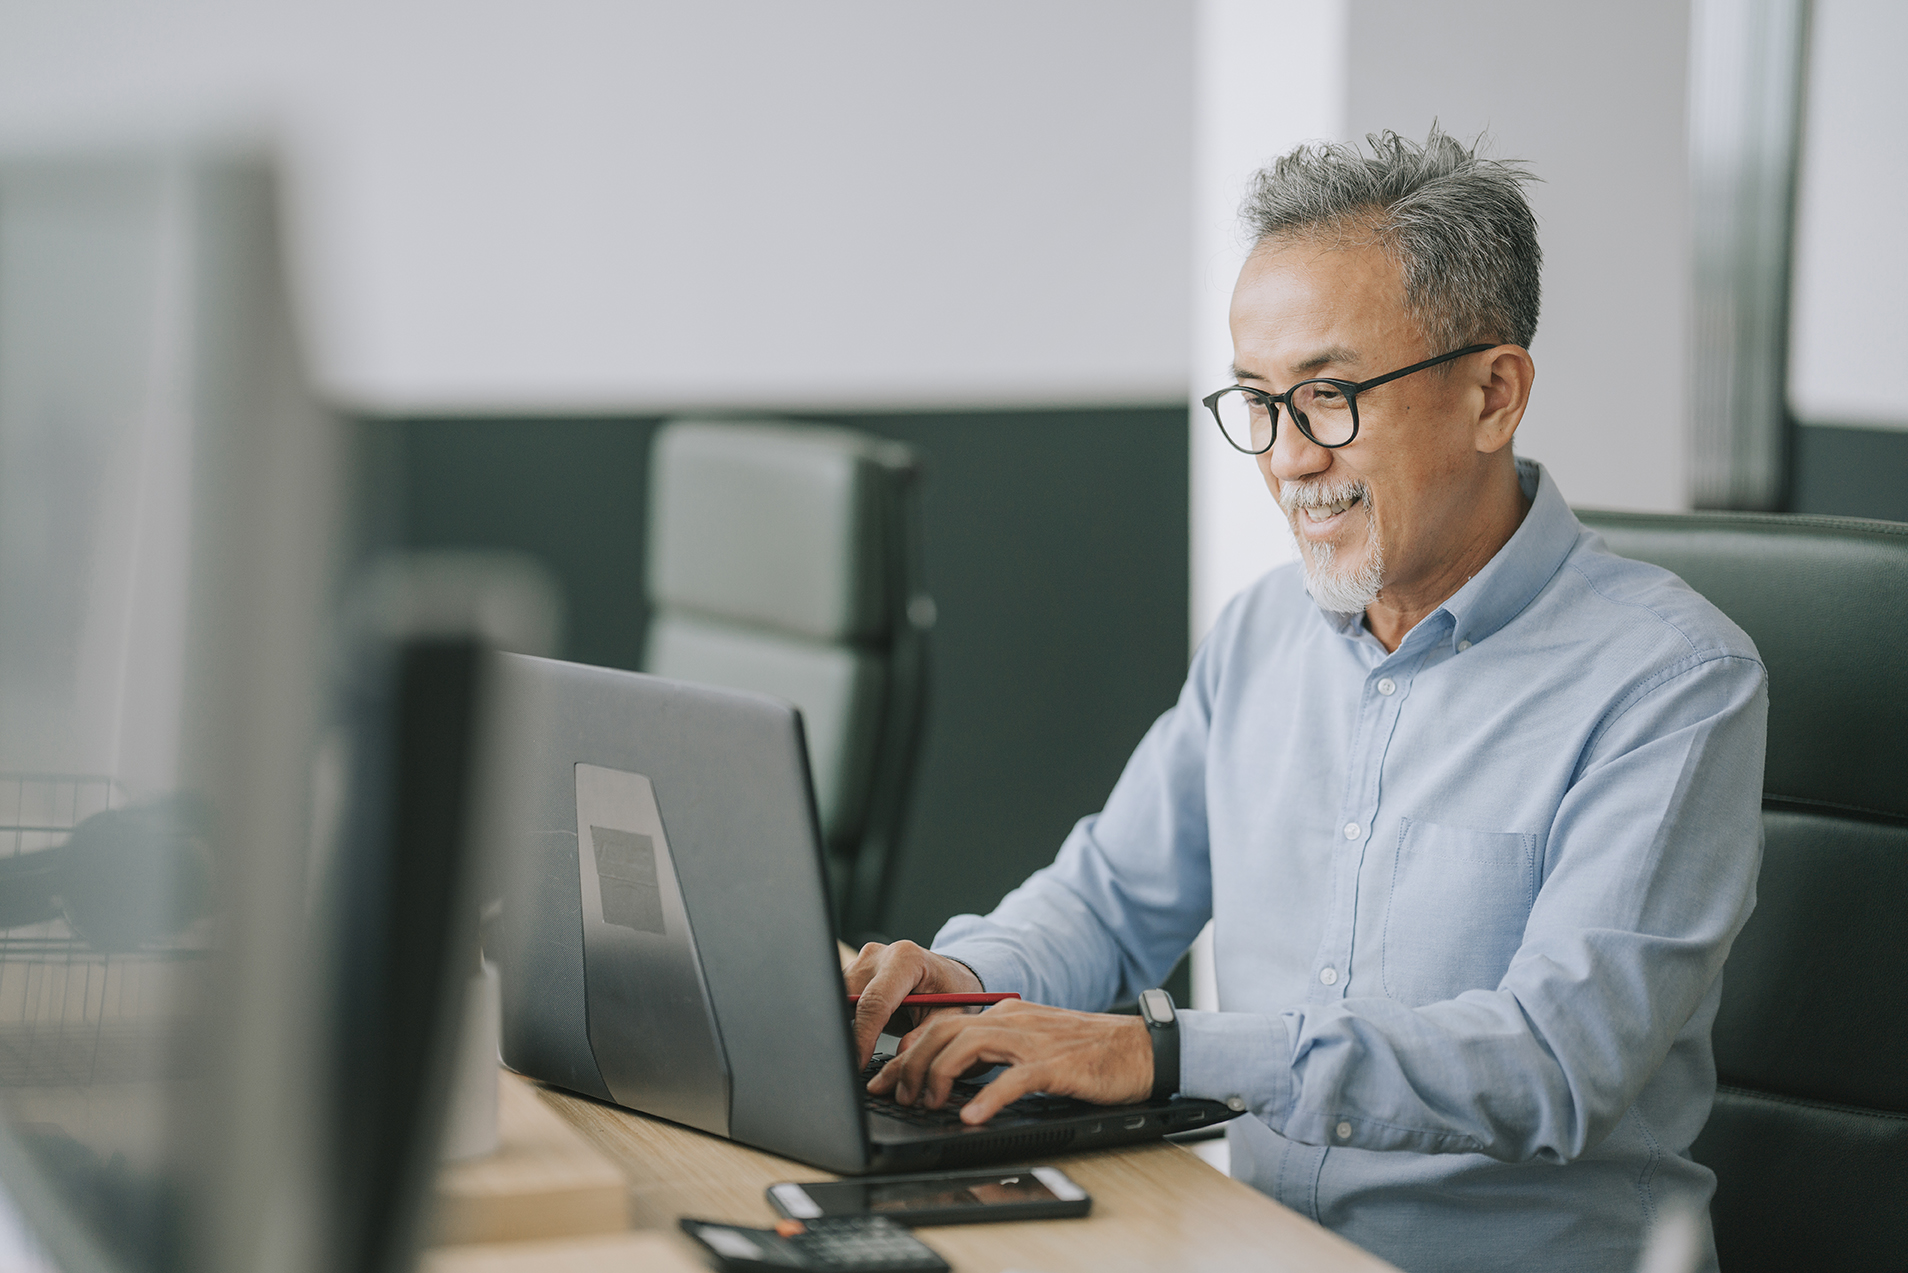 Smiling senior East Asian man typing on a laptop in a modern office space